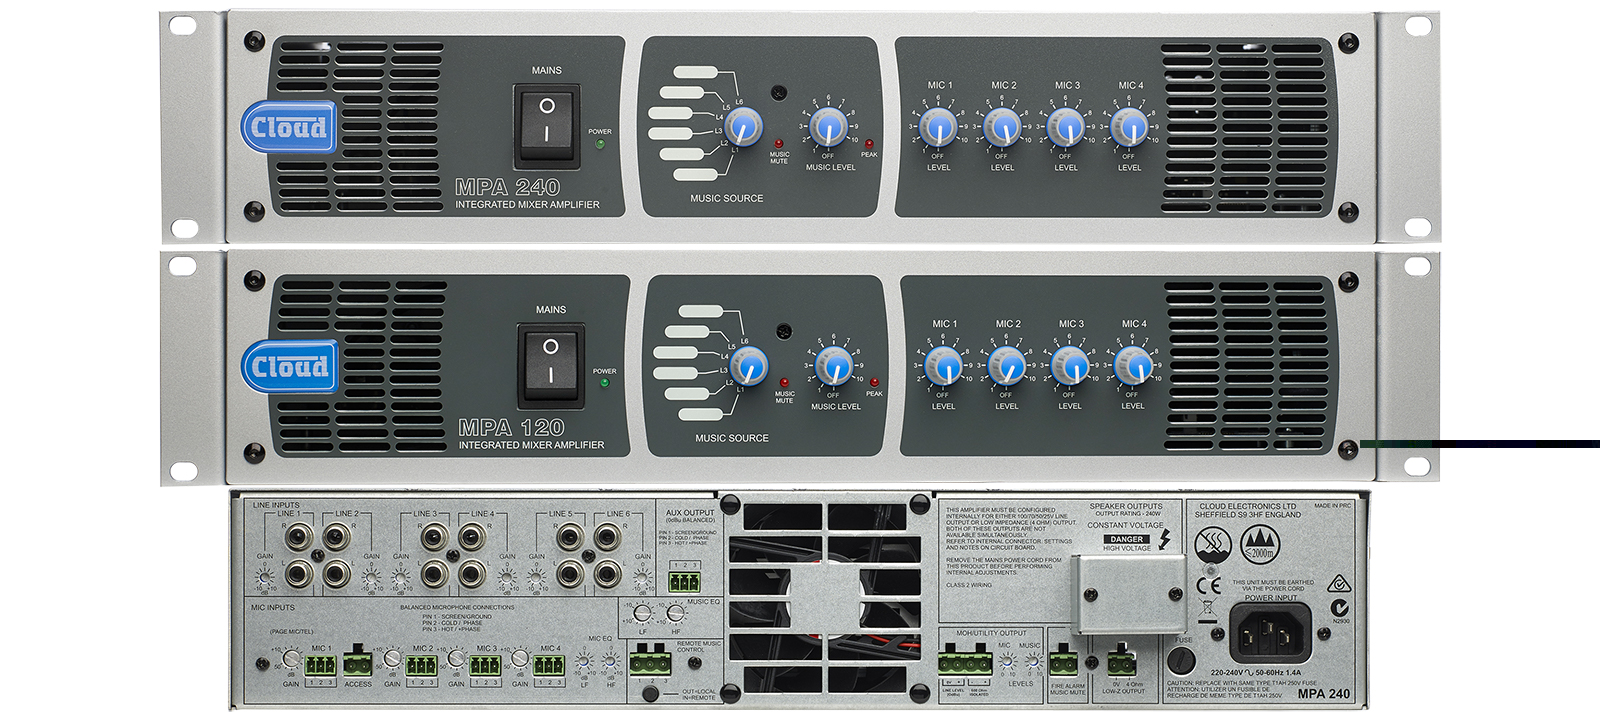 Cloud MPA-Series Mixer Amplifiers - Refreshed and Now Shipping